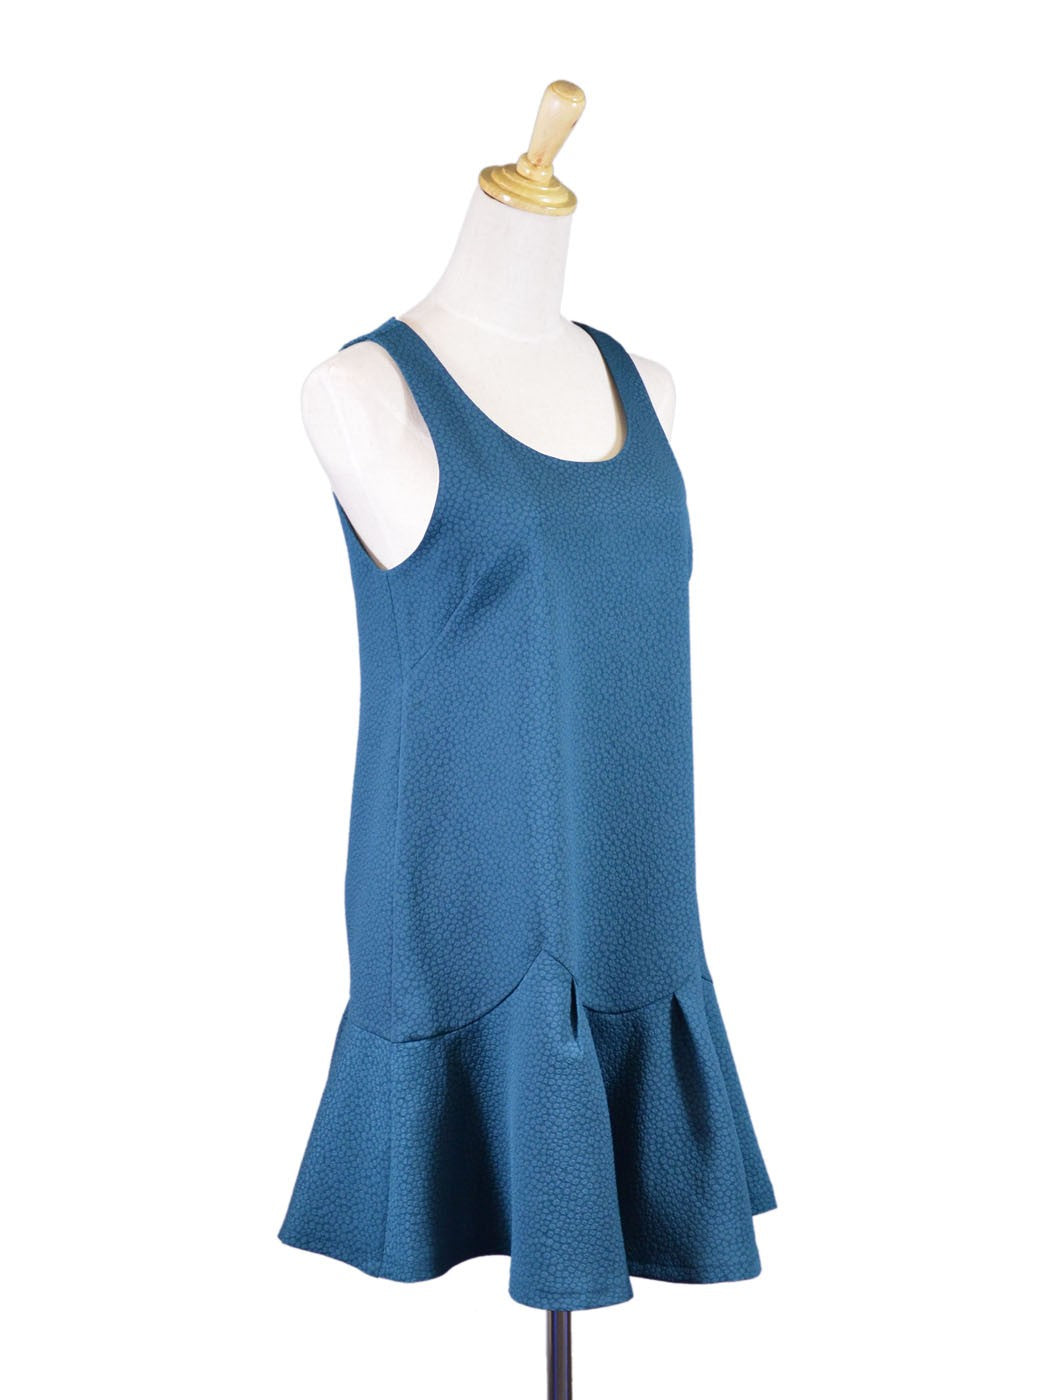 Lush Ladylike Vintage Inspired 1970's Drop Waist Special Occasion Textured Dress